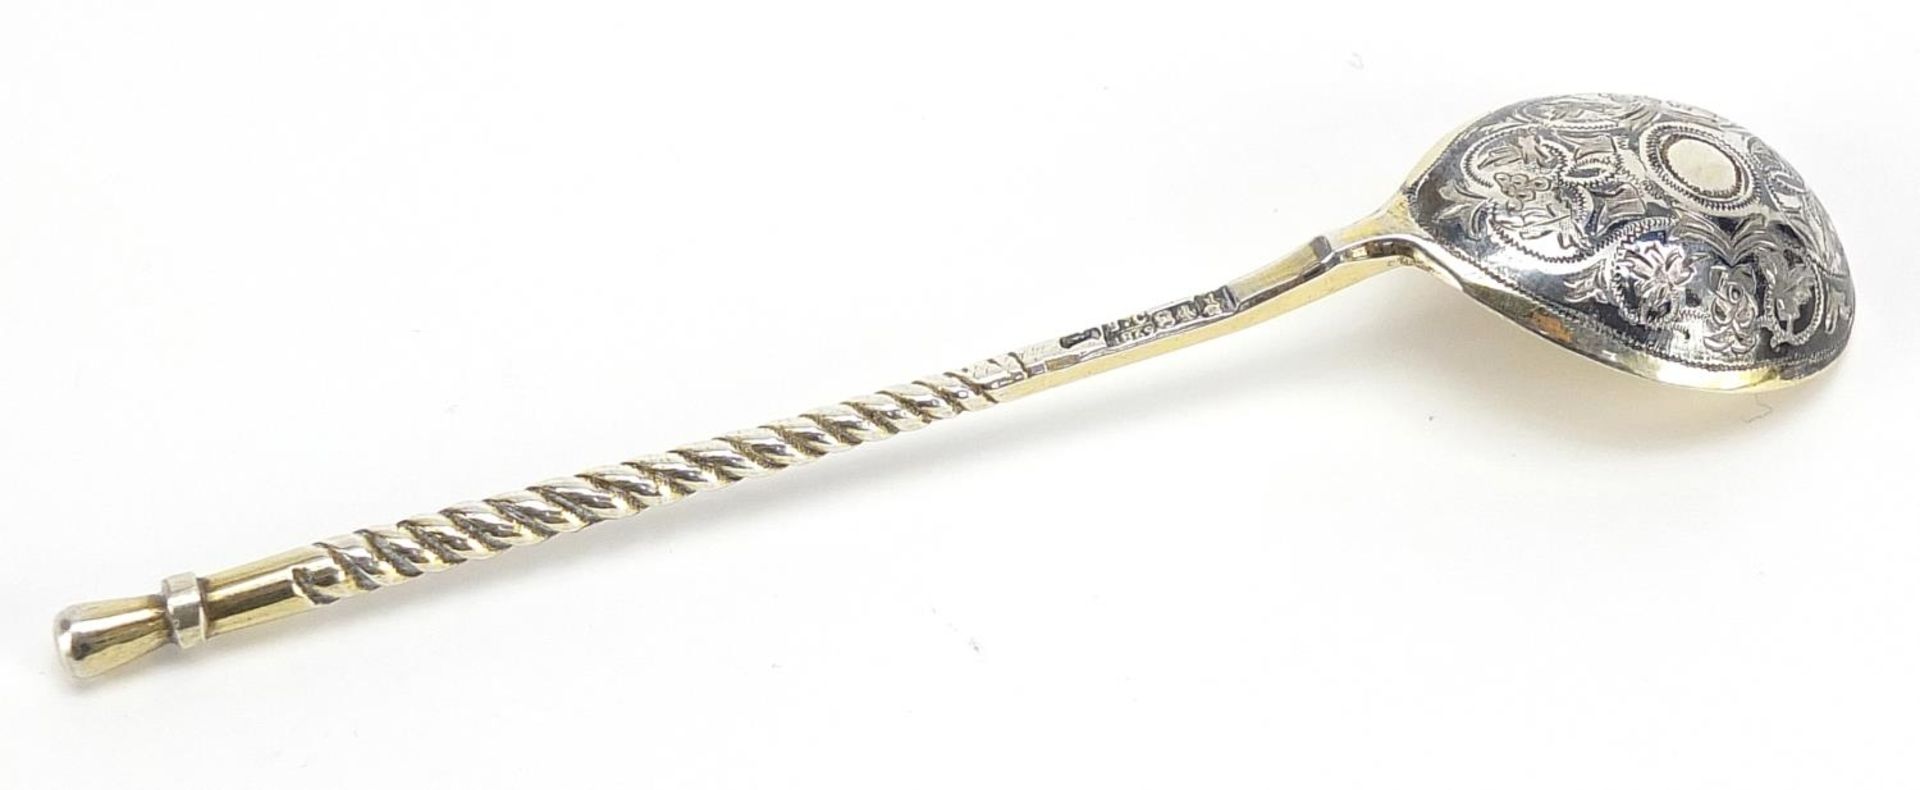 Rusian silver gilt niello work spoon, impressed Russian marks, 14cm in length, 20.8g - Image 2 of 3